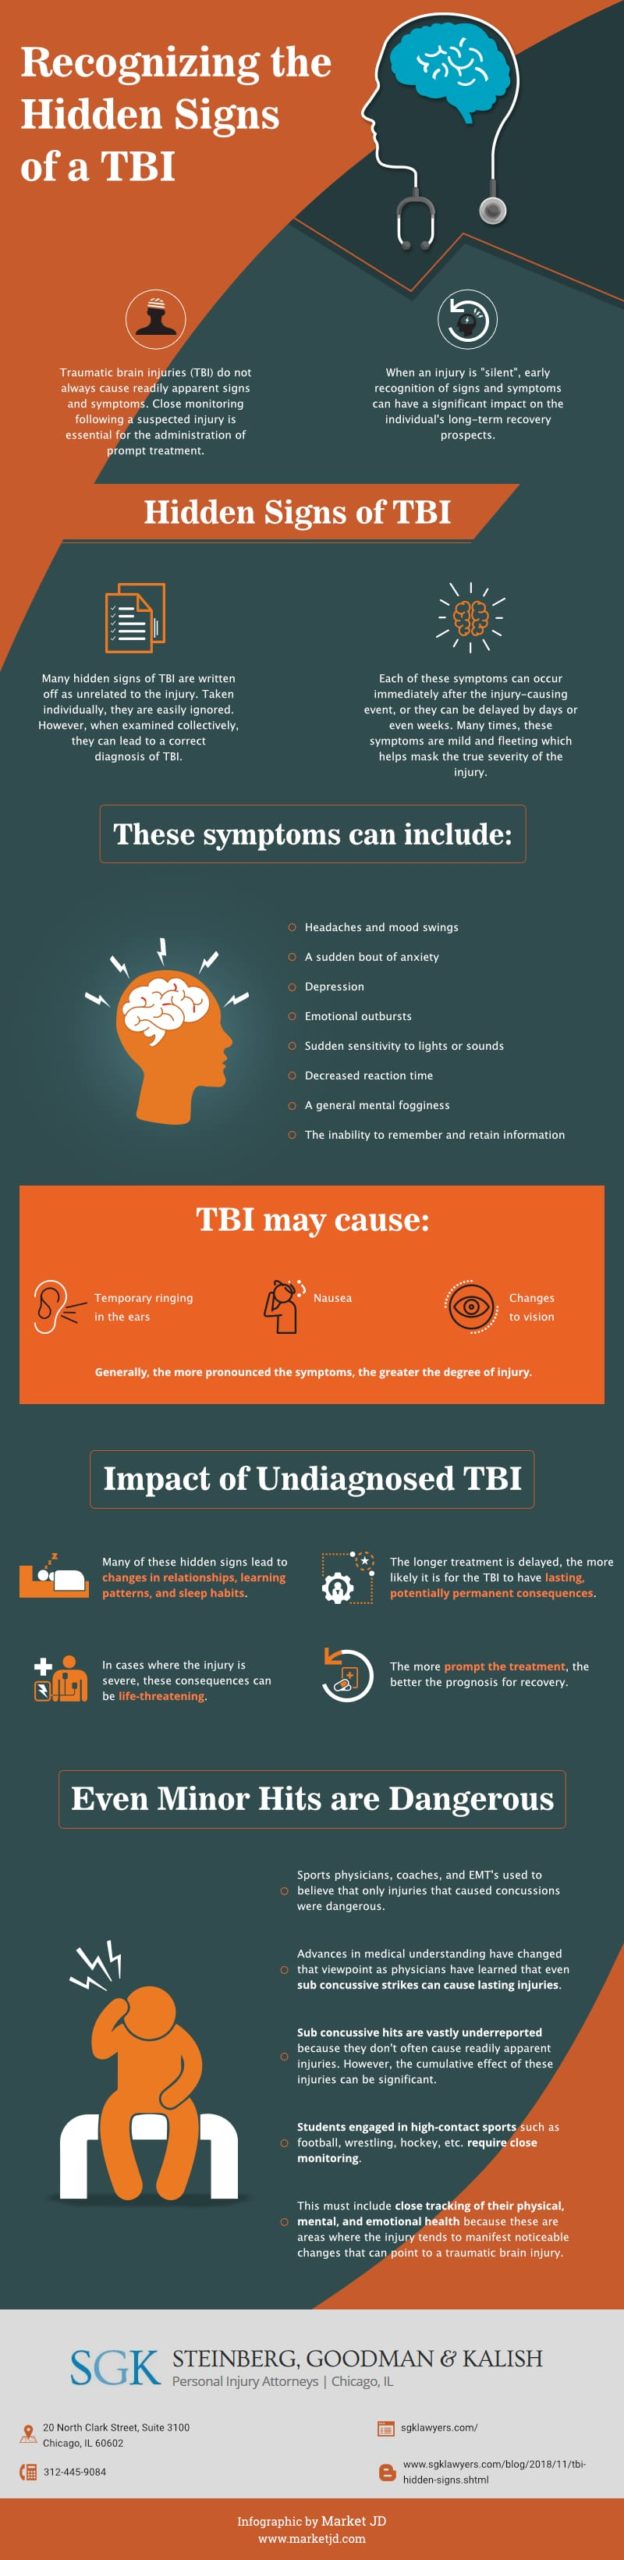 Steinberg, Goodman and Kalish_2018_November_short_Recognizing the Hidden Signs of a TBI.jpg